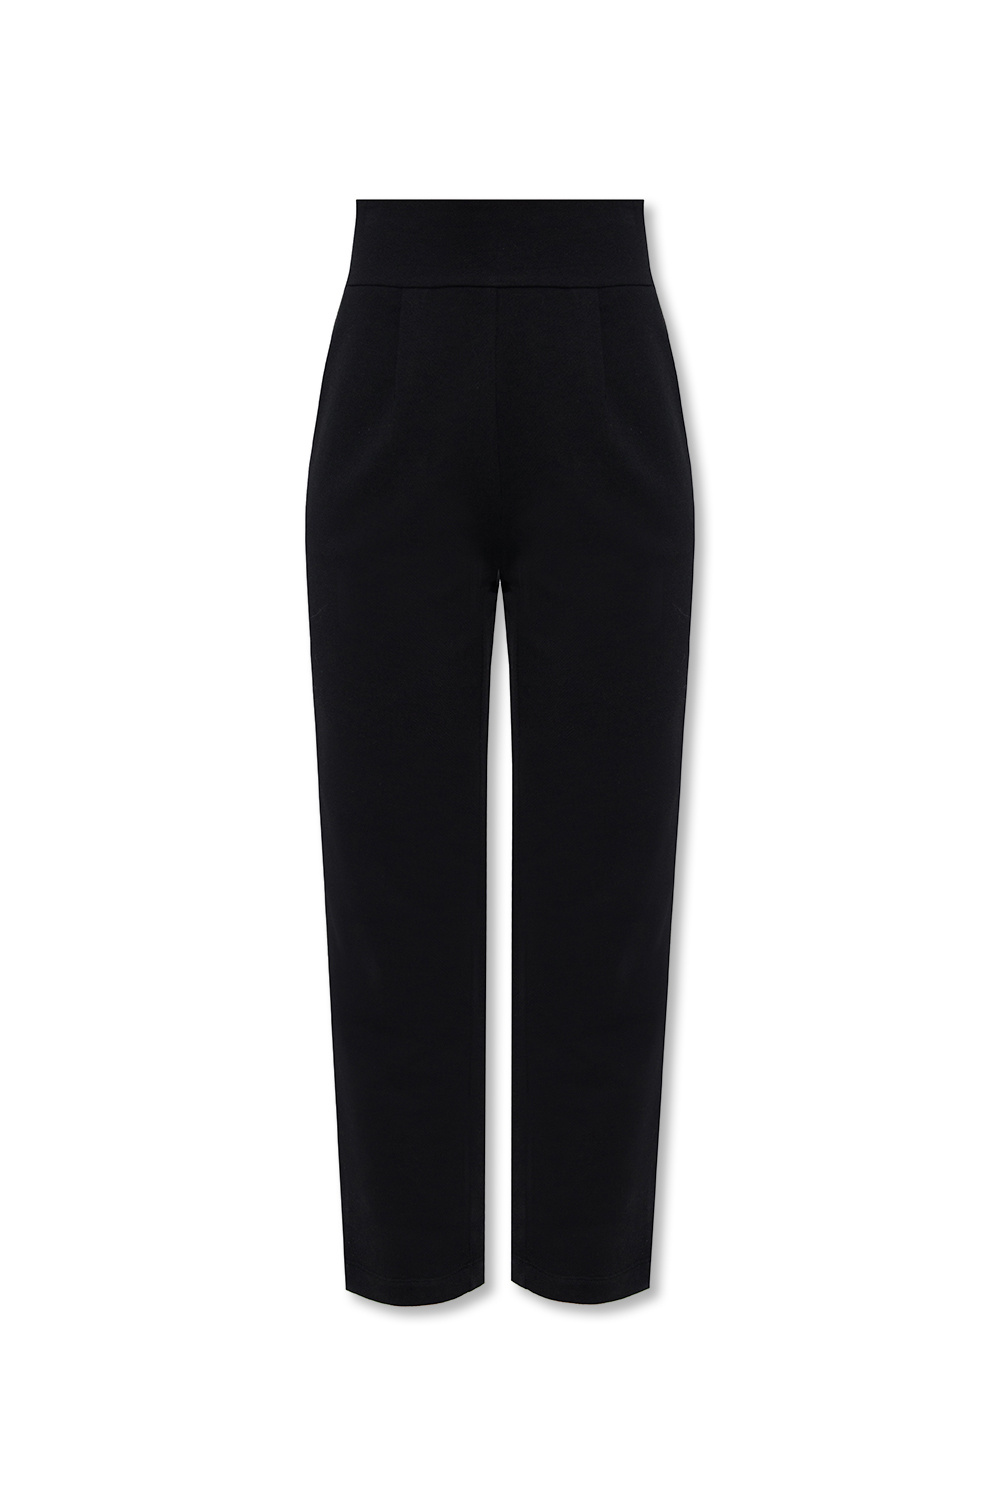 Love Moschino illet trousers with logo